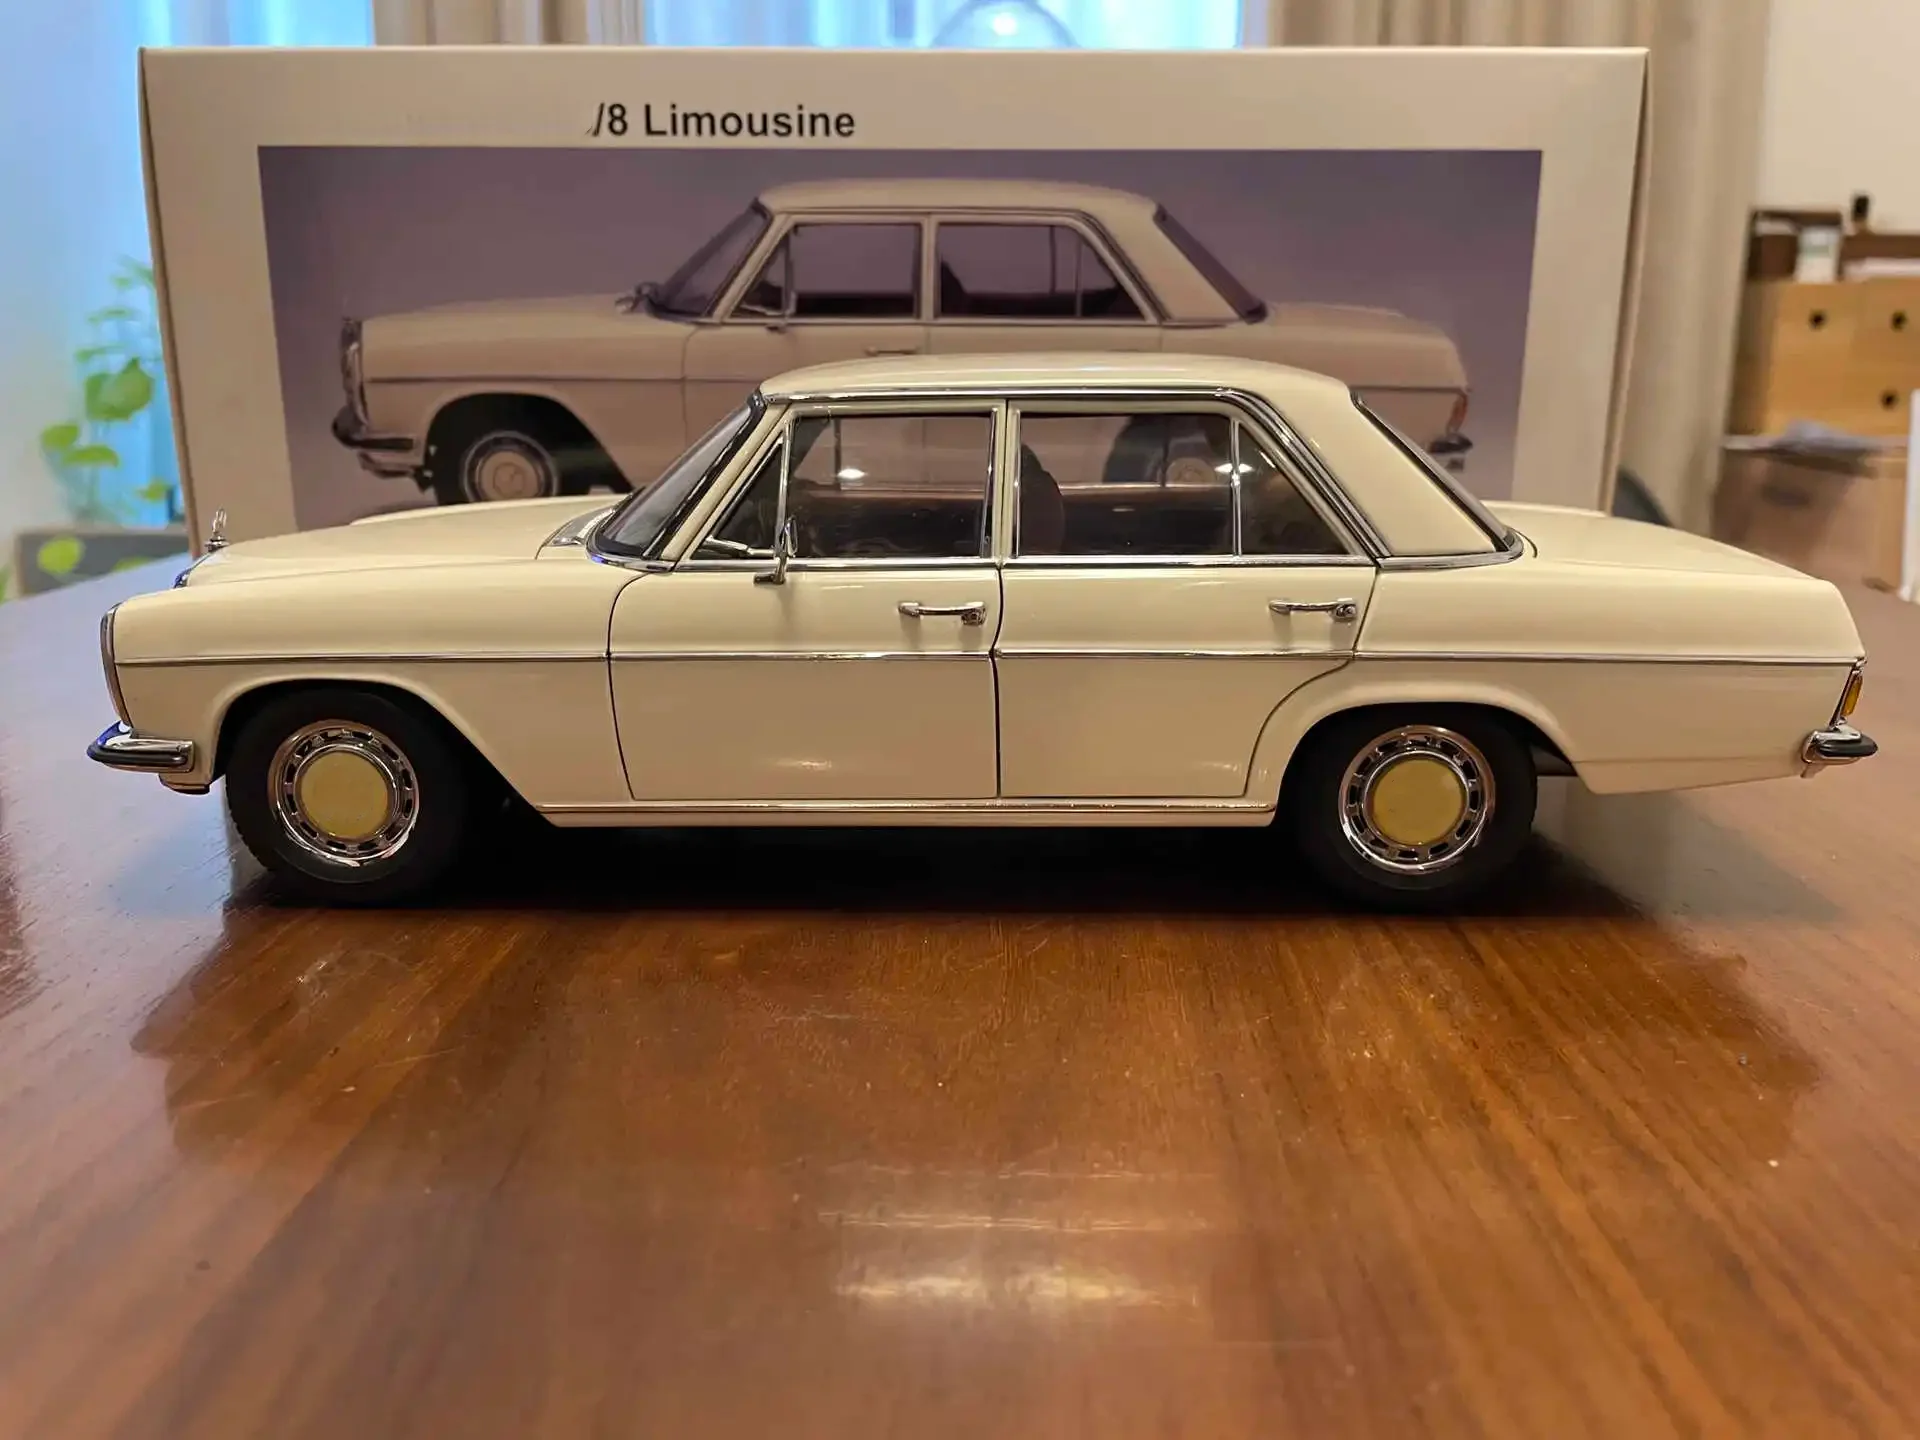 

Autoart 1:18 220D W155 Limousine White Simulation Limited Edition All Open Alloy Metal Static Car Model Toy Gift